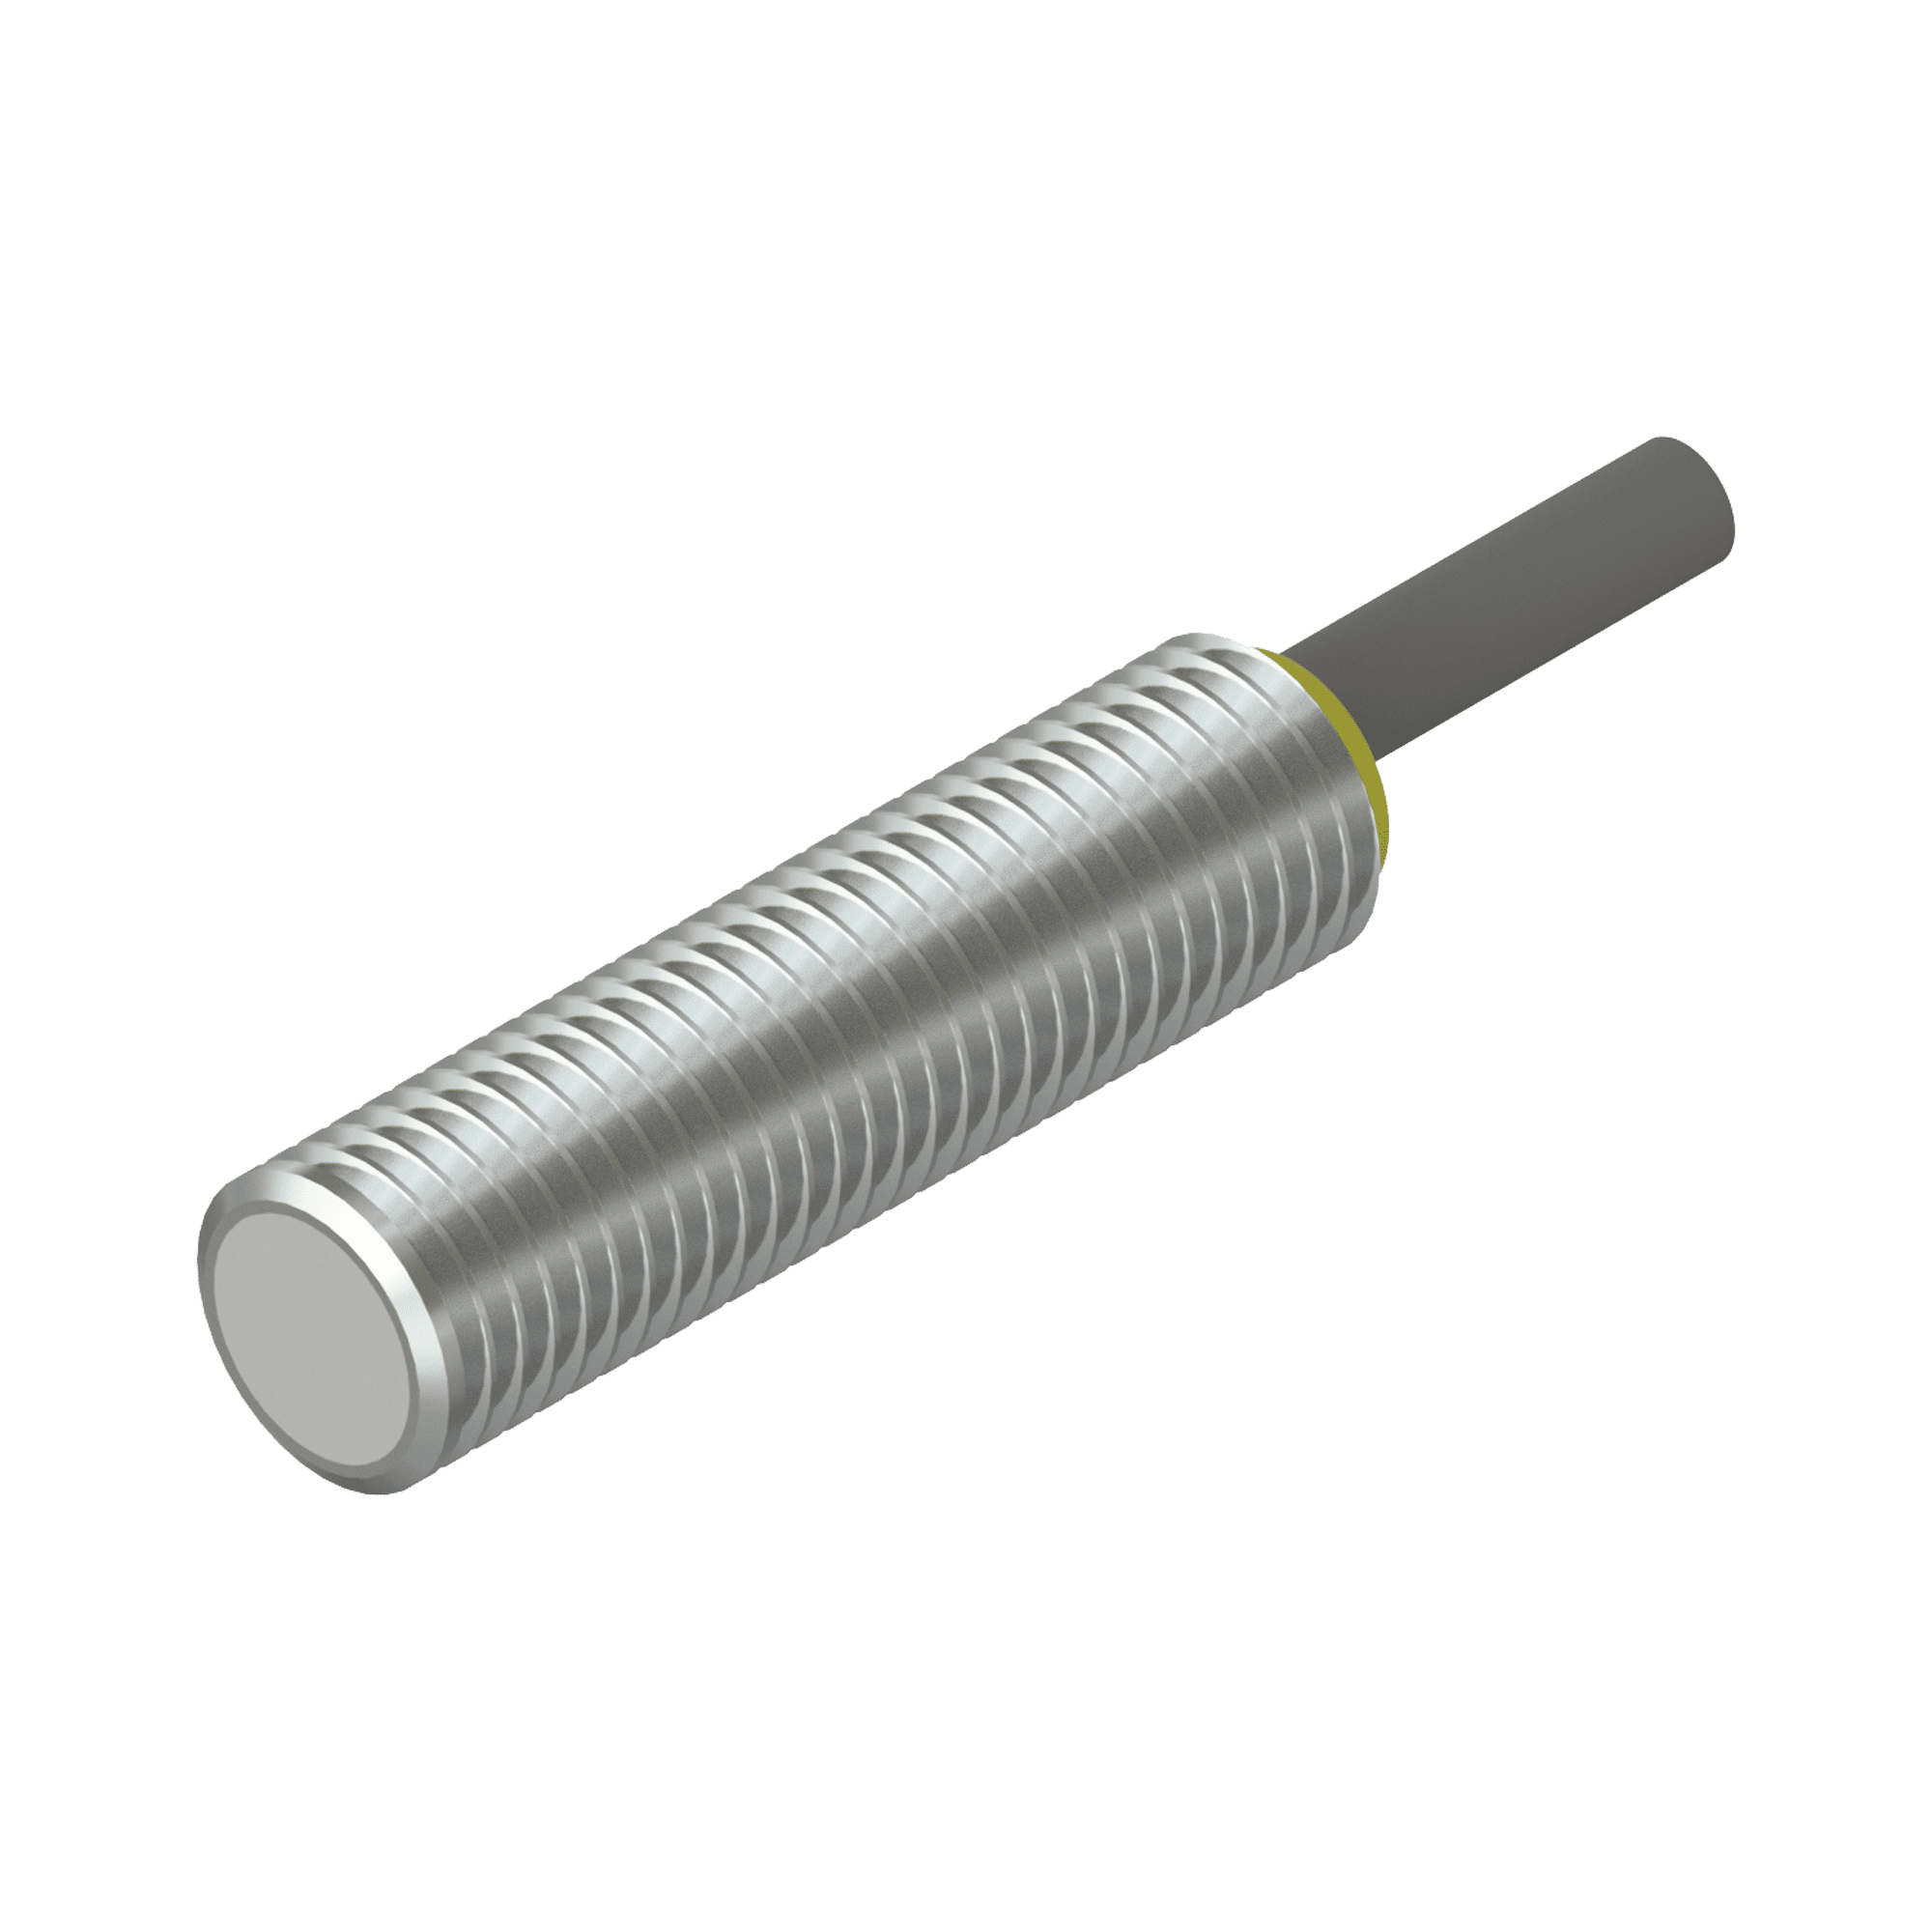 Inductive round sensor M8 Length 30mm with2m PVC cable connection